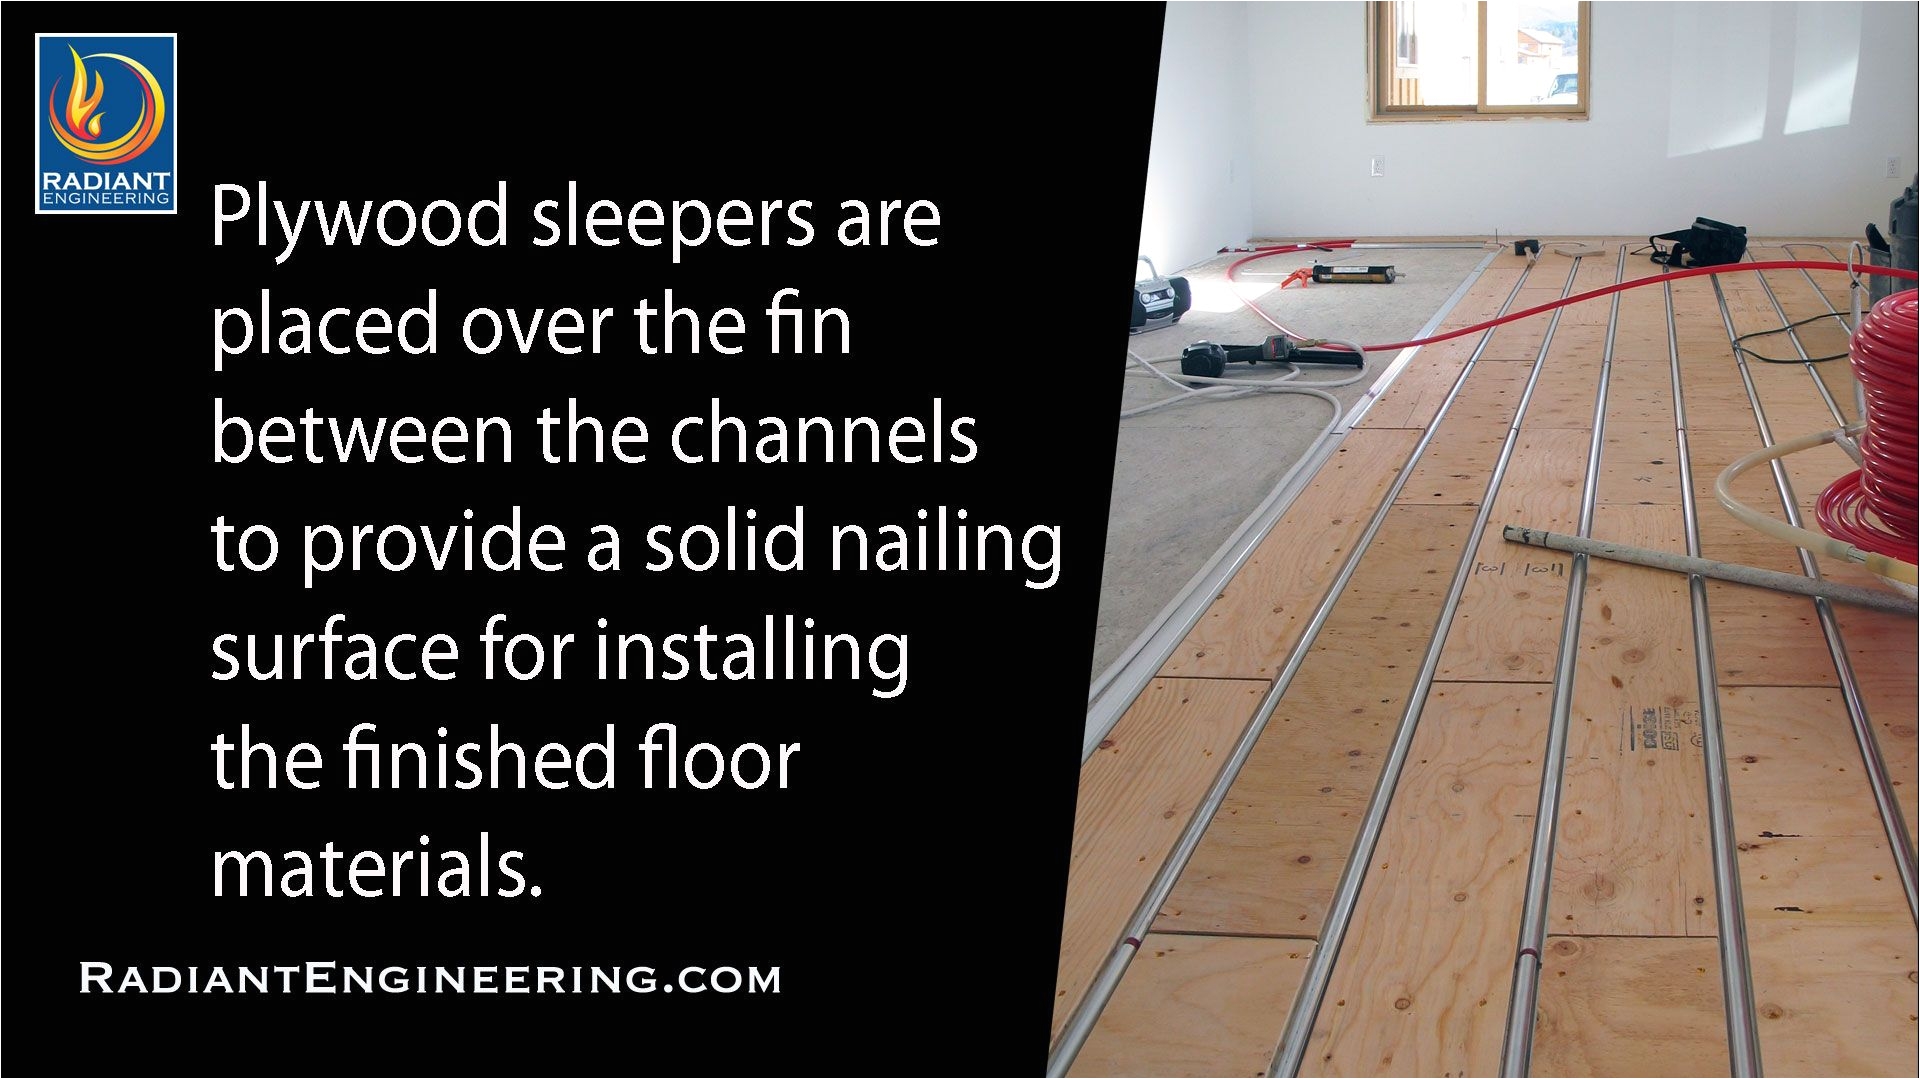 radiant heated floor installation with thermofin u and pex tubing ready for installation of wood